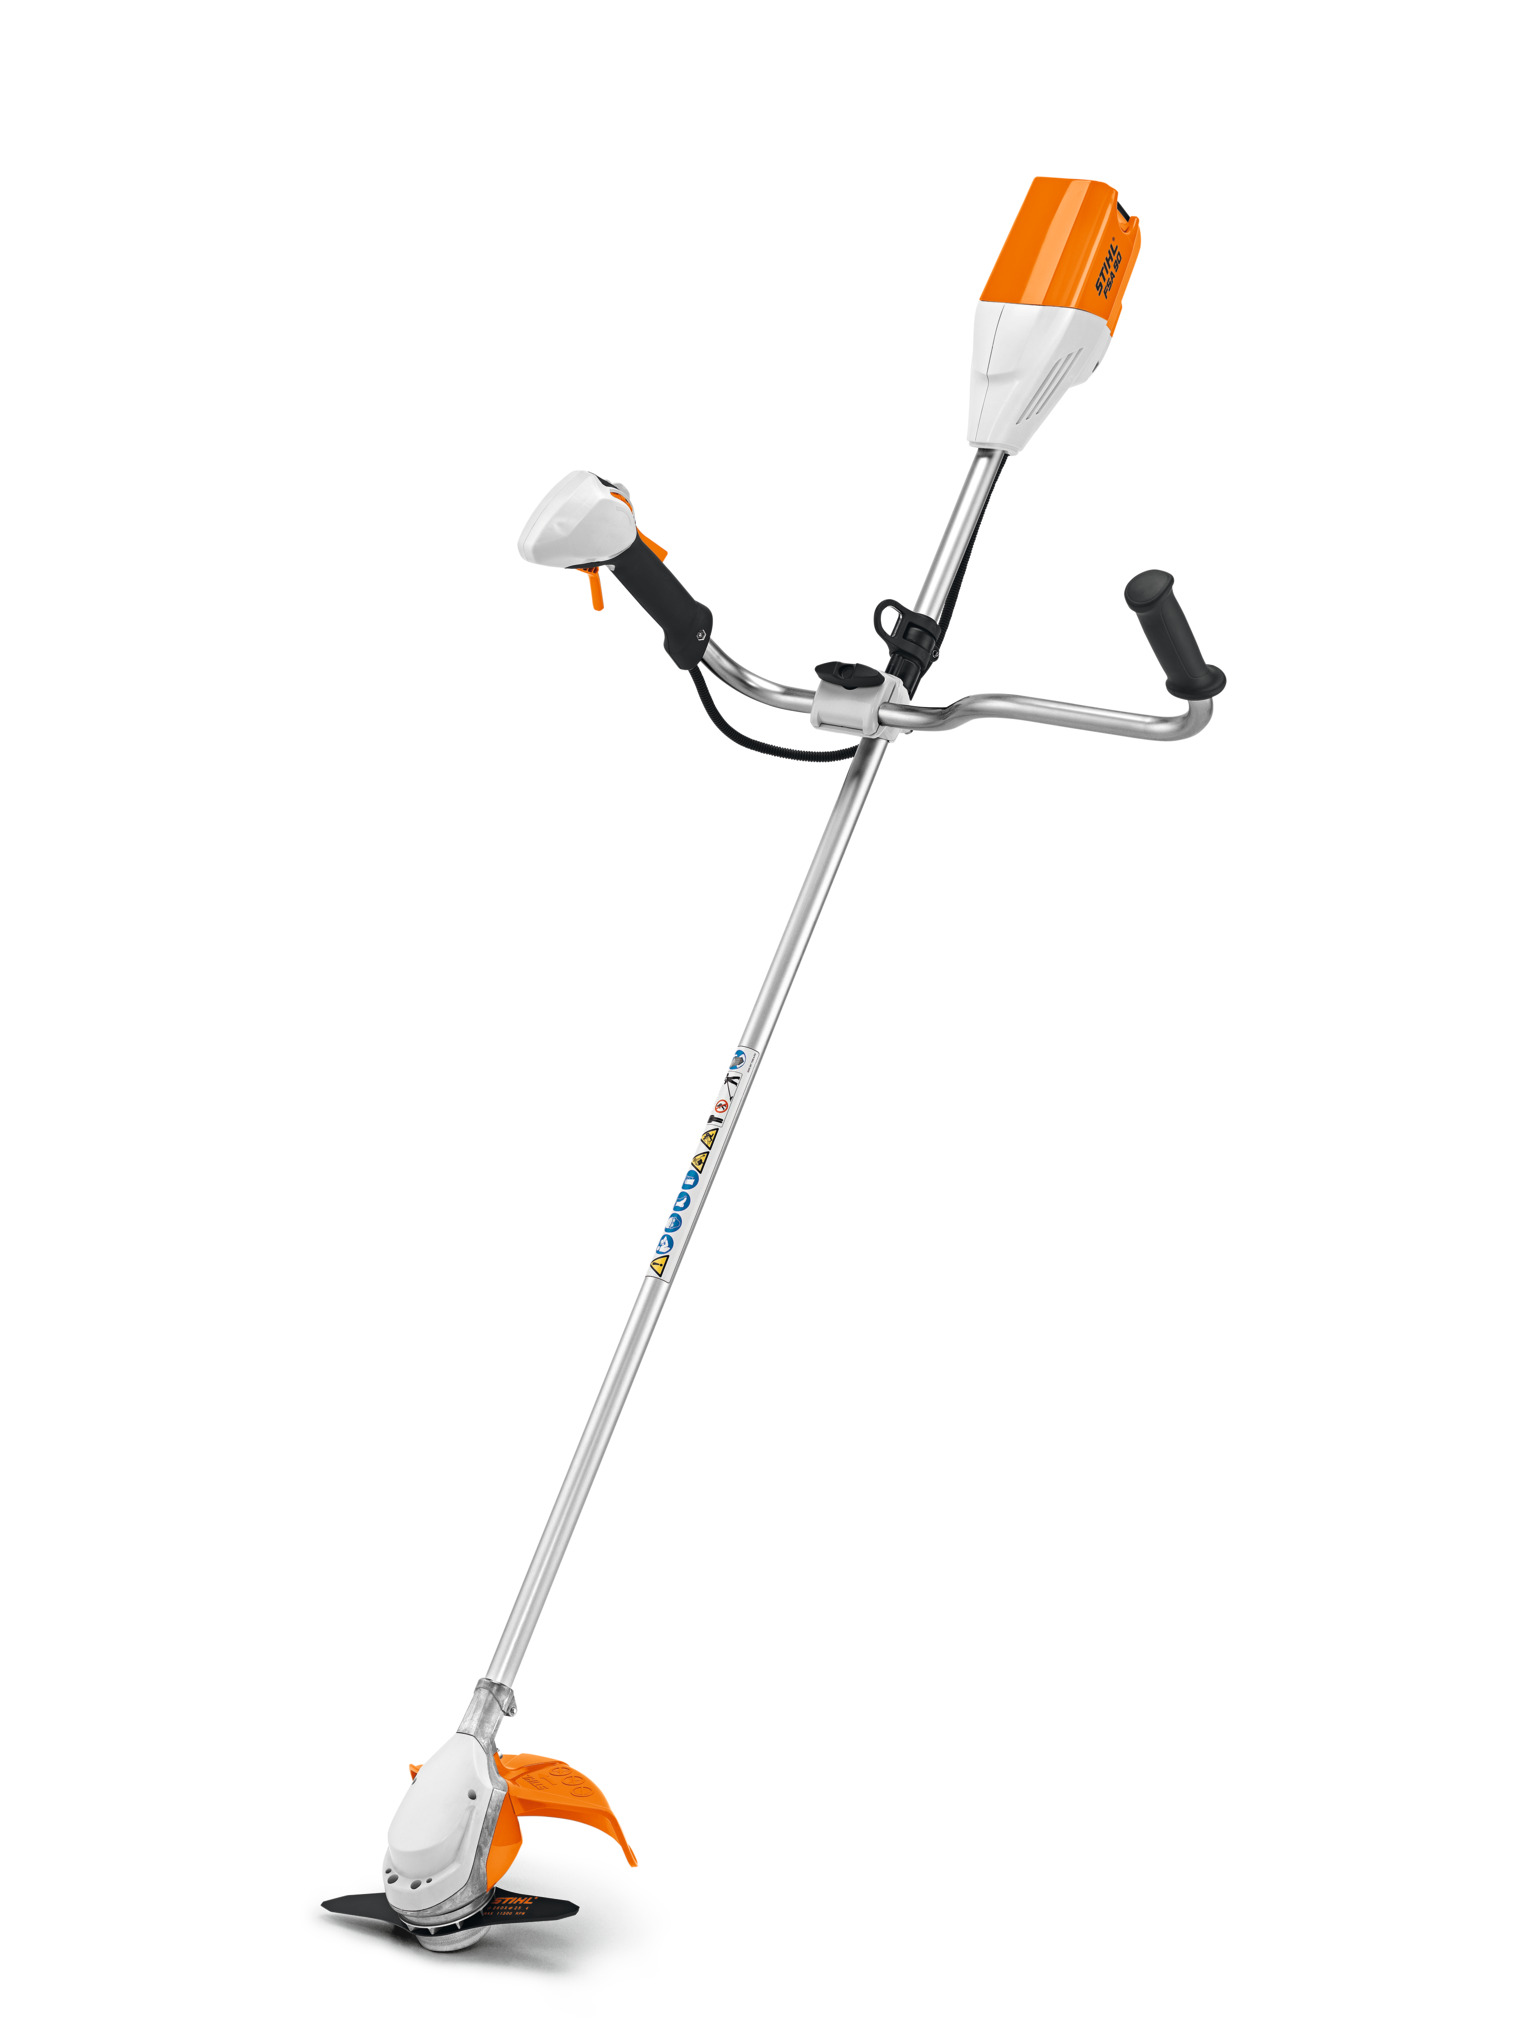 accugrastrimmers | STIHL